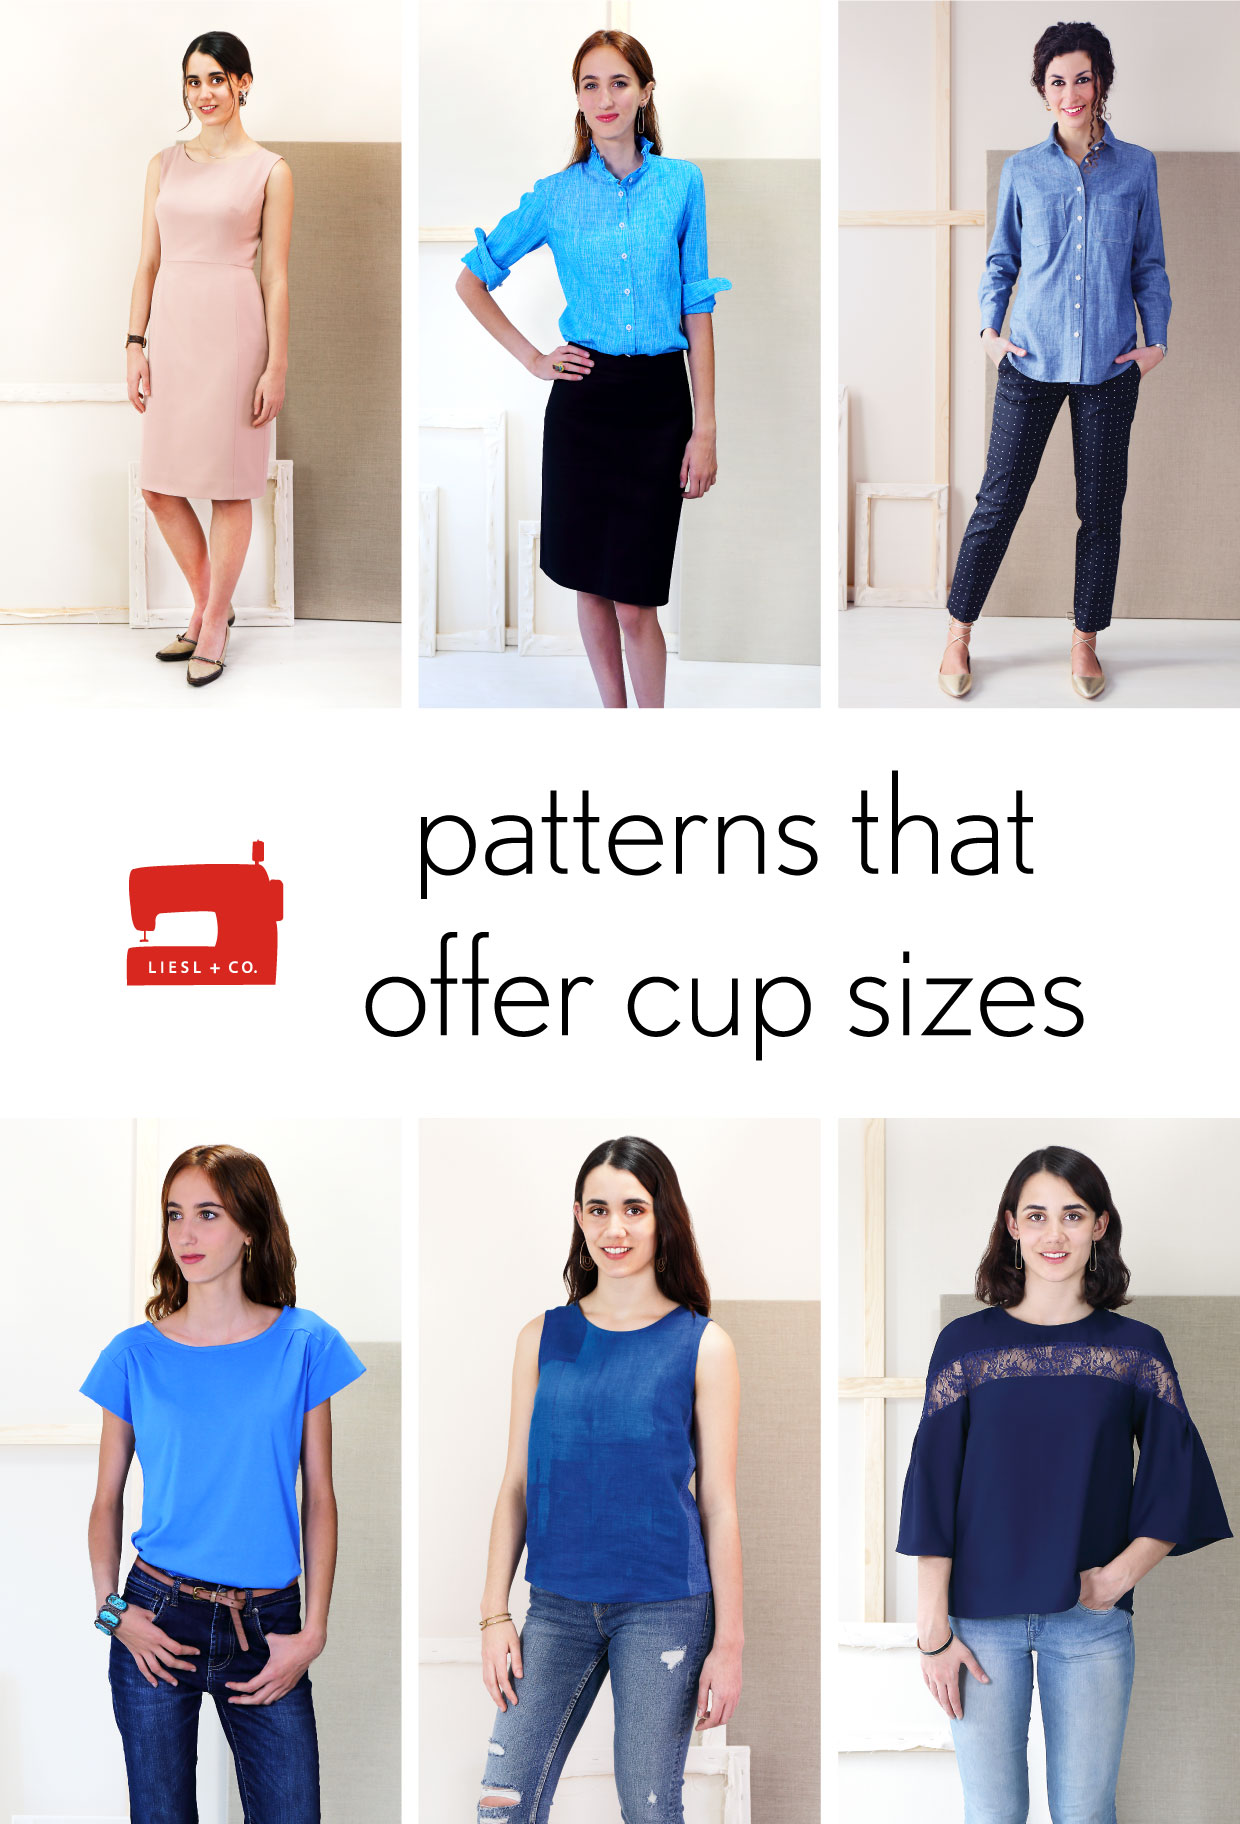 Liesl + Co. Patterns That Offer Cup Sizes, Blog